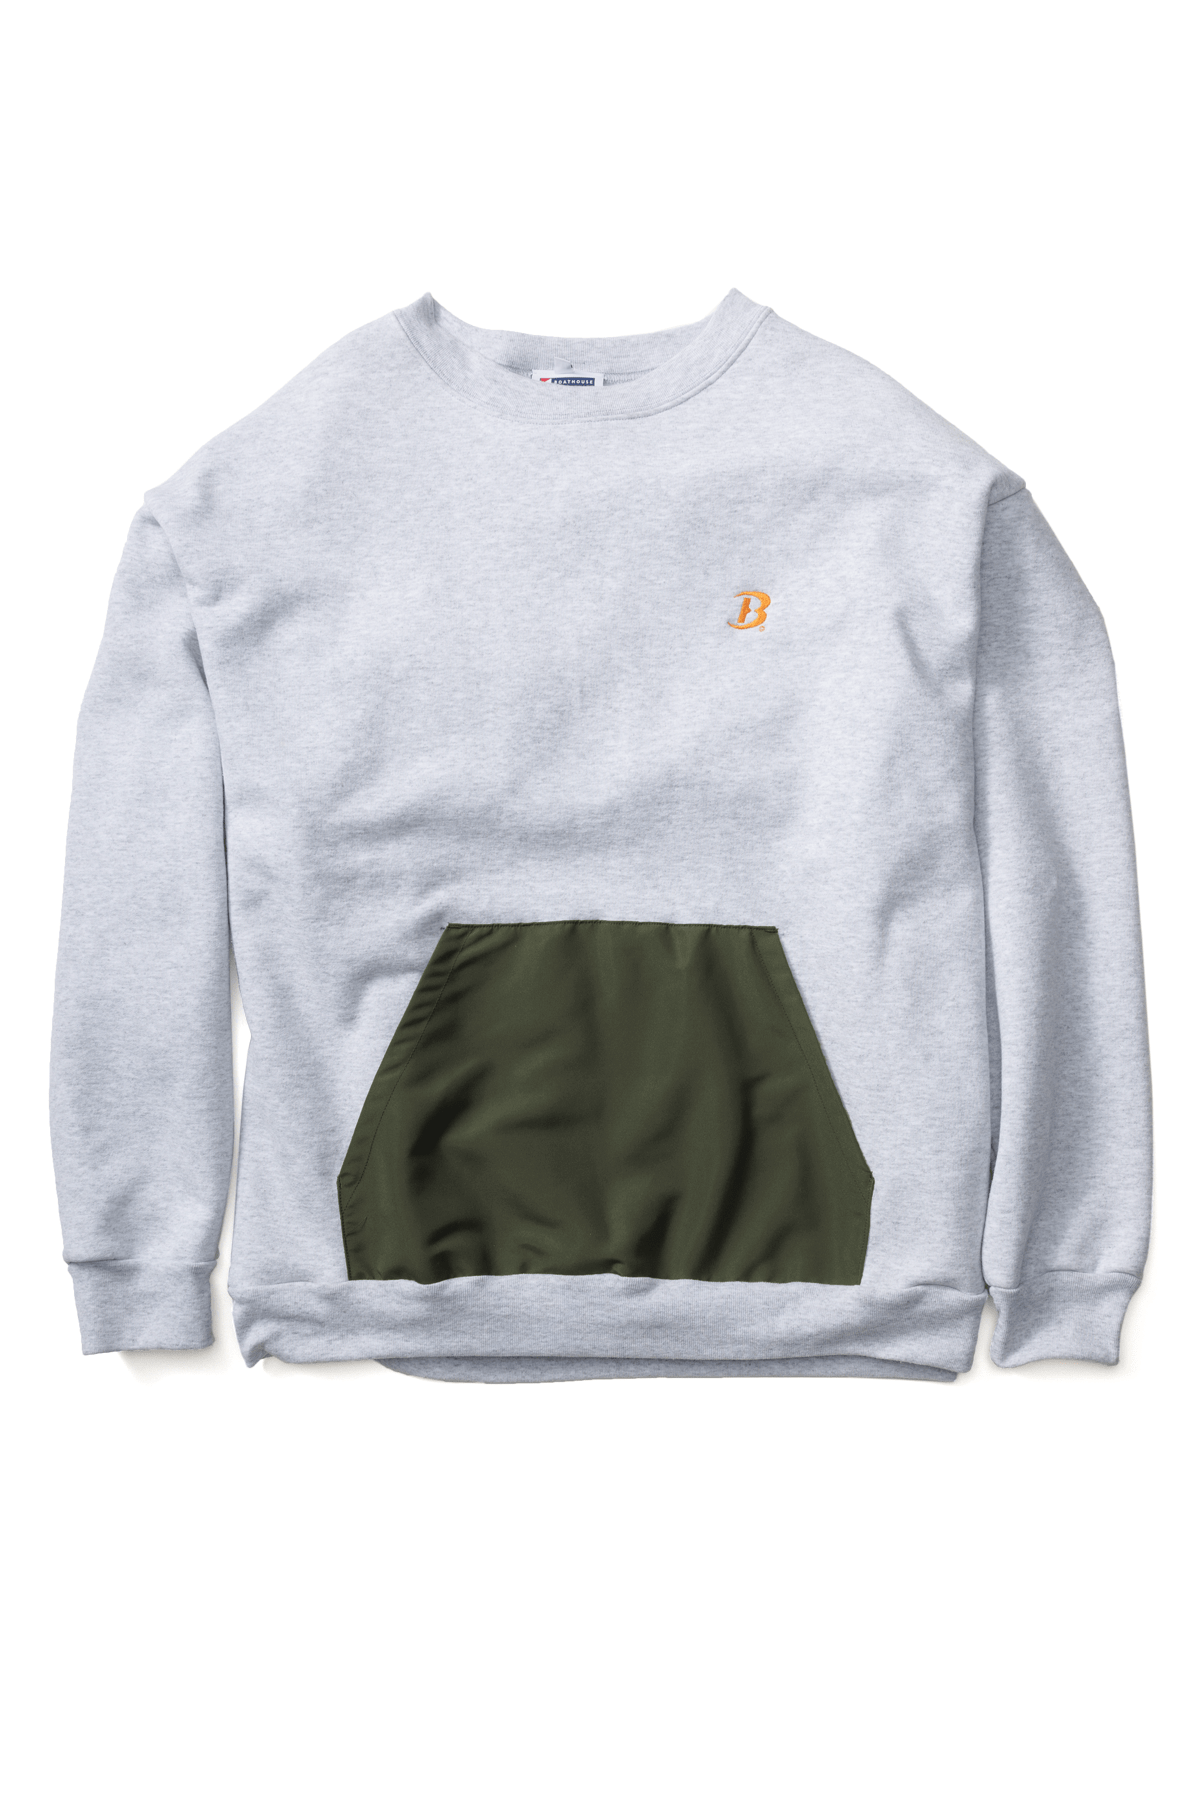 Reclaimed Boathouse Crew Grey/Olive / Small